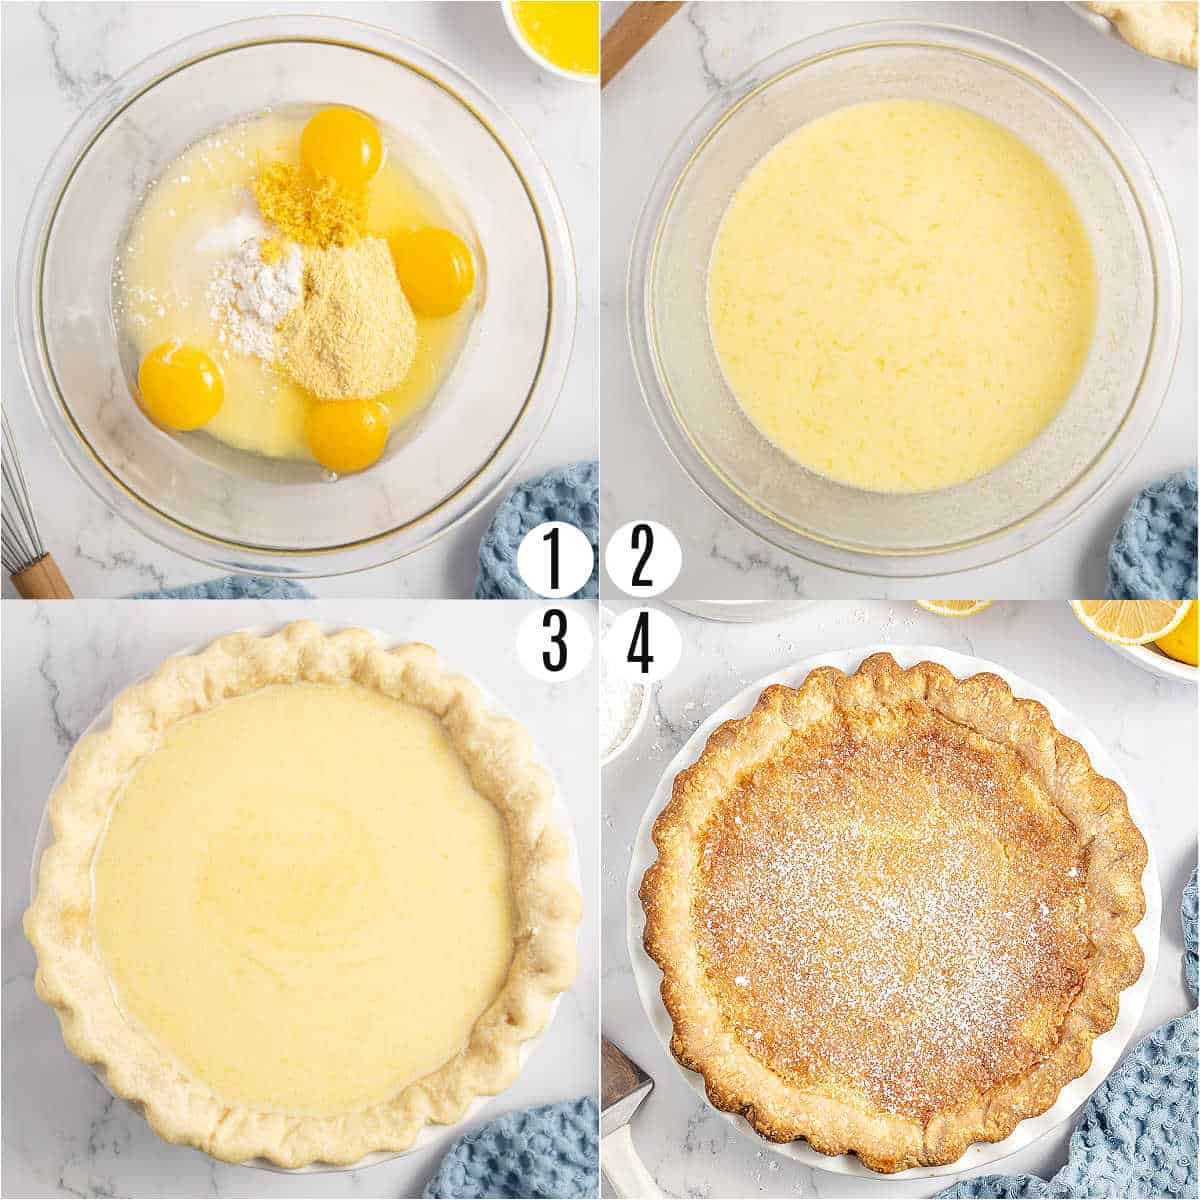 Step by step photos showing how to make lemon chess pie.